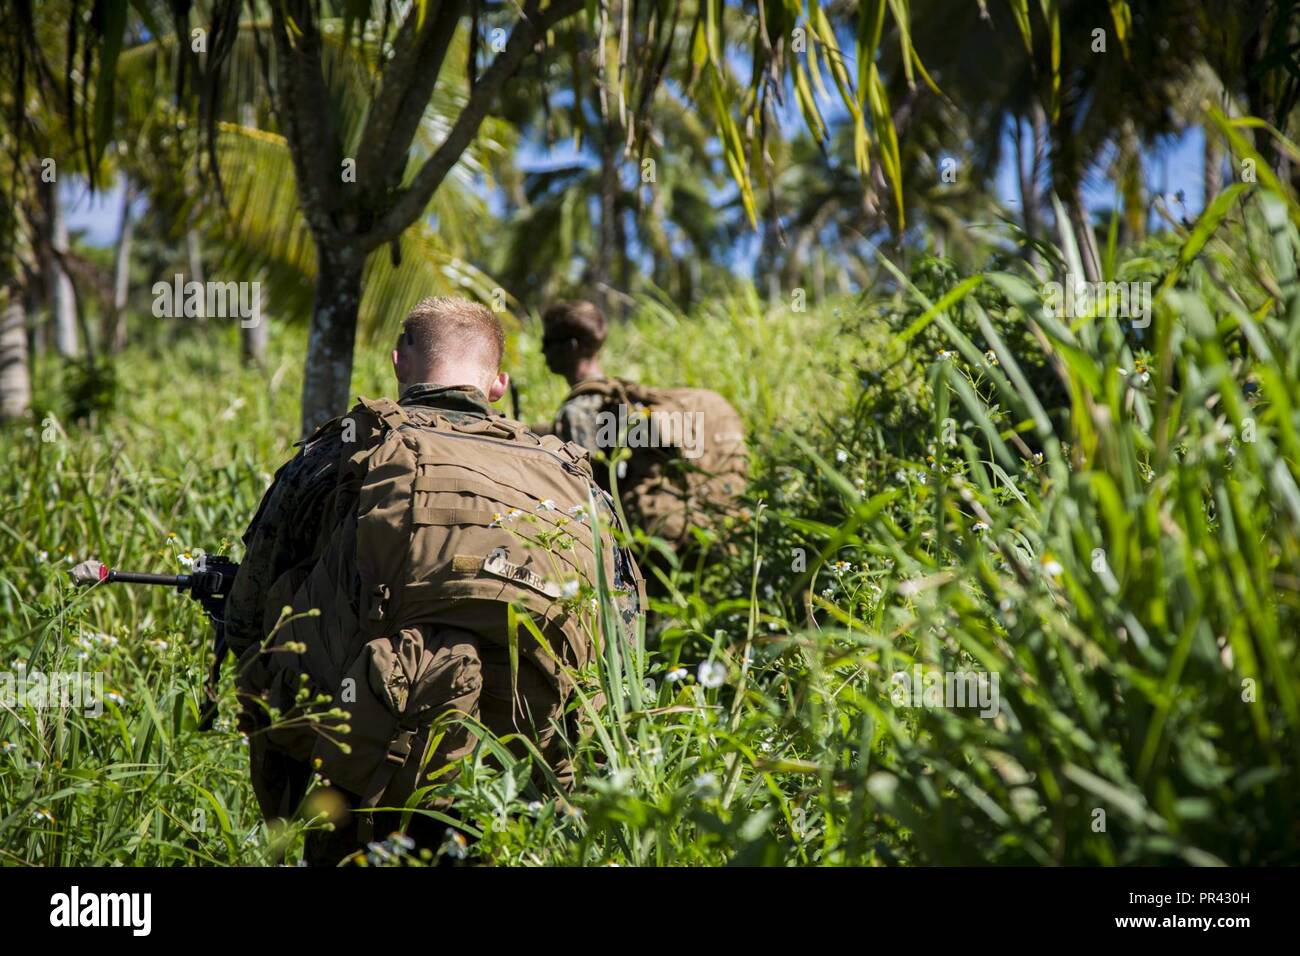 U.S. Marines with 3rd Battalion 4th Marines attached to Task Force Koa Moana 17, move to an objective during a joint service infantry training exercise as a part of Exercise TAFAKULA on Vava’u Island, Tonga, July 25, 2017. Exercise TAFAKULA is designed to strengthen the military-to-military, and community relations between Tonga’s His Majesty’s Armed Forces, French Army of New Caledonia, New Zealand Defense Force, and the United States Armed Forces. Stock Photo